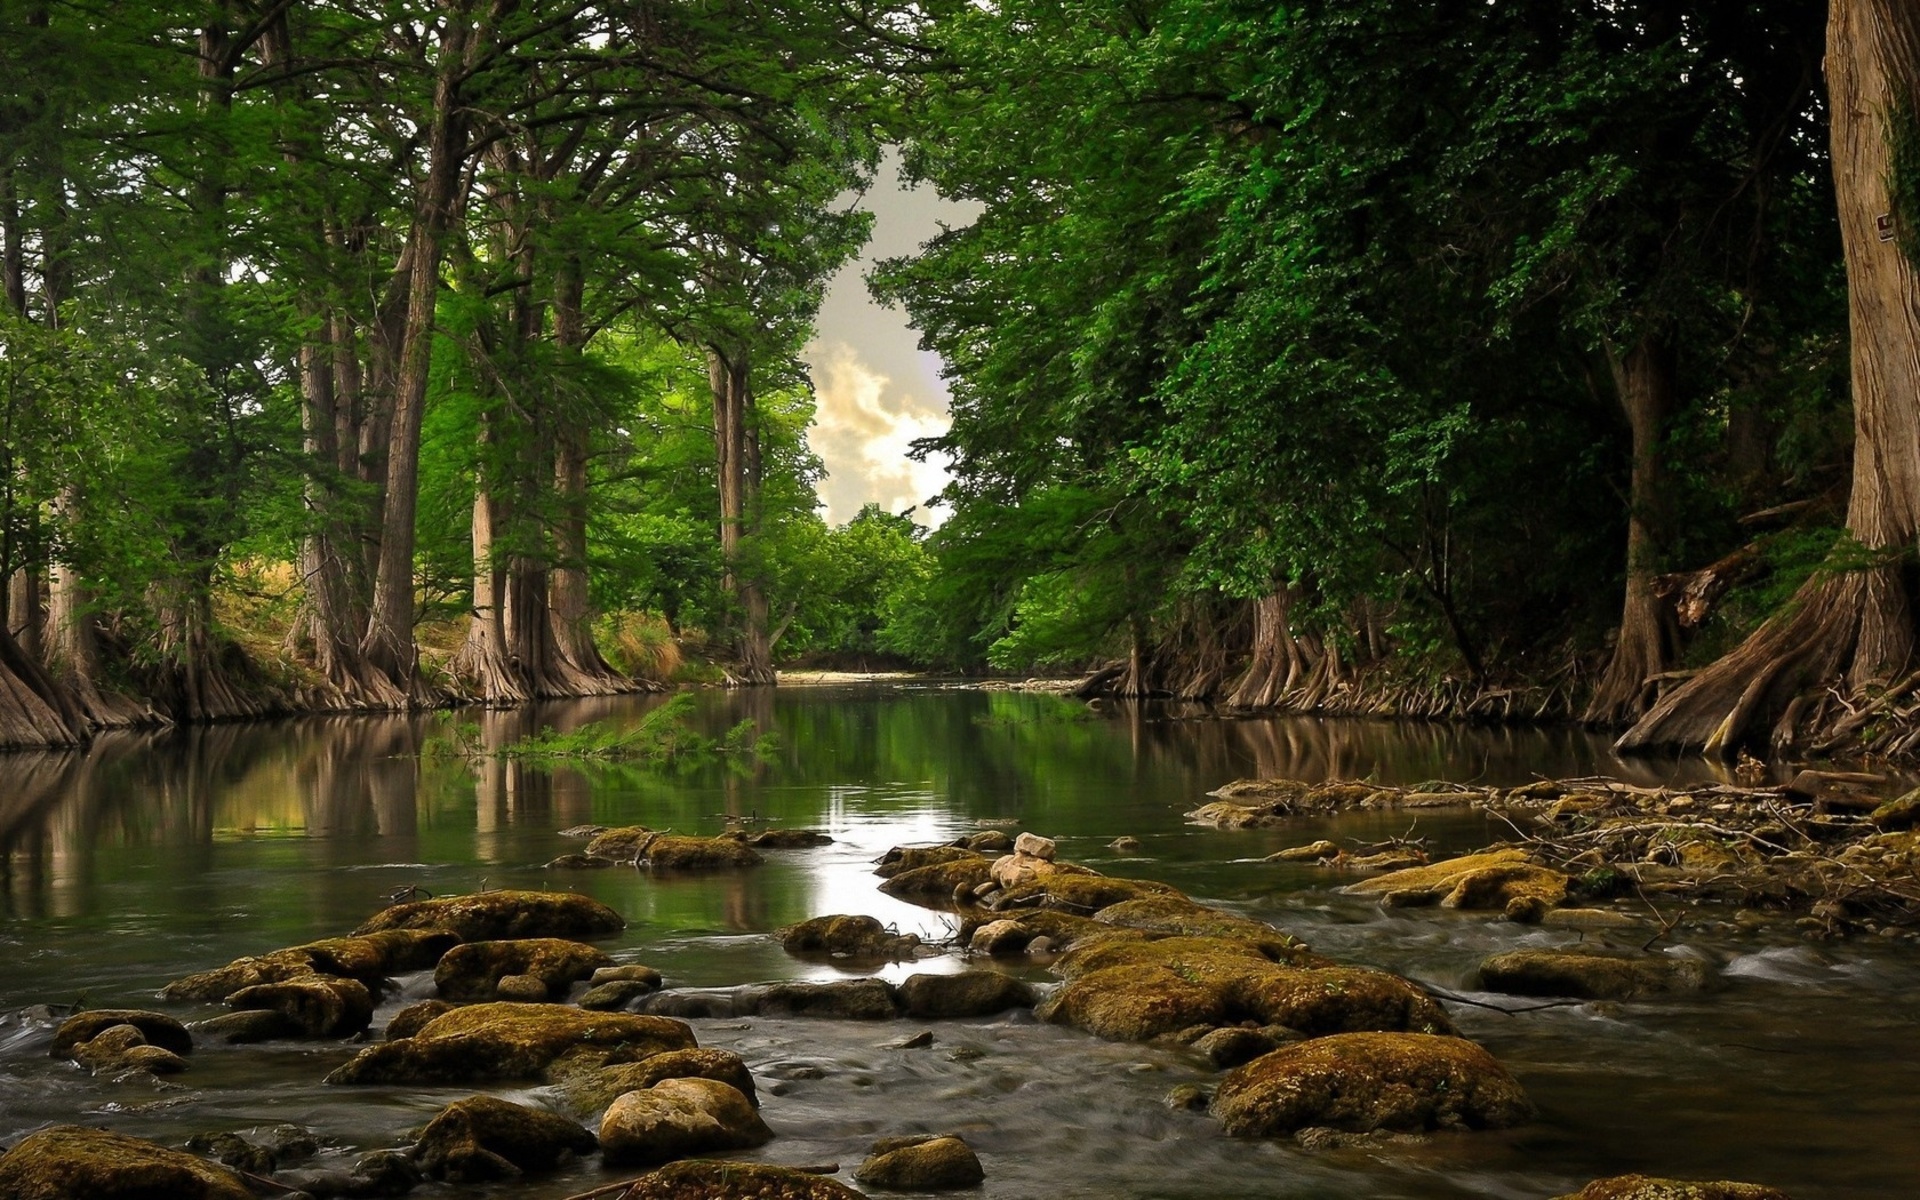  water trees forest jungle reflection rocks sky clouds leaves wallpaper